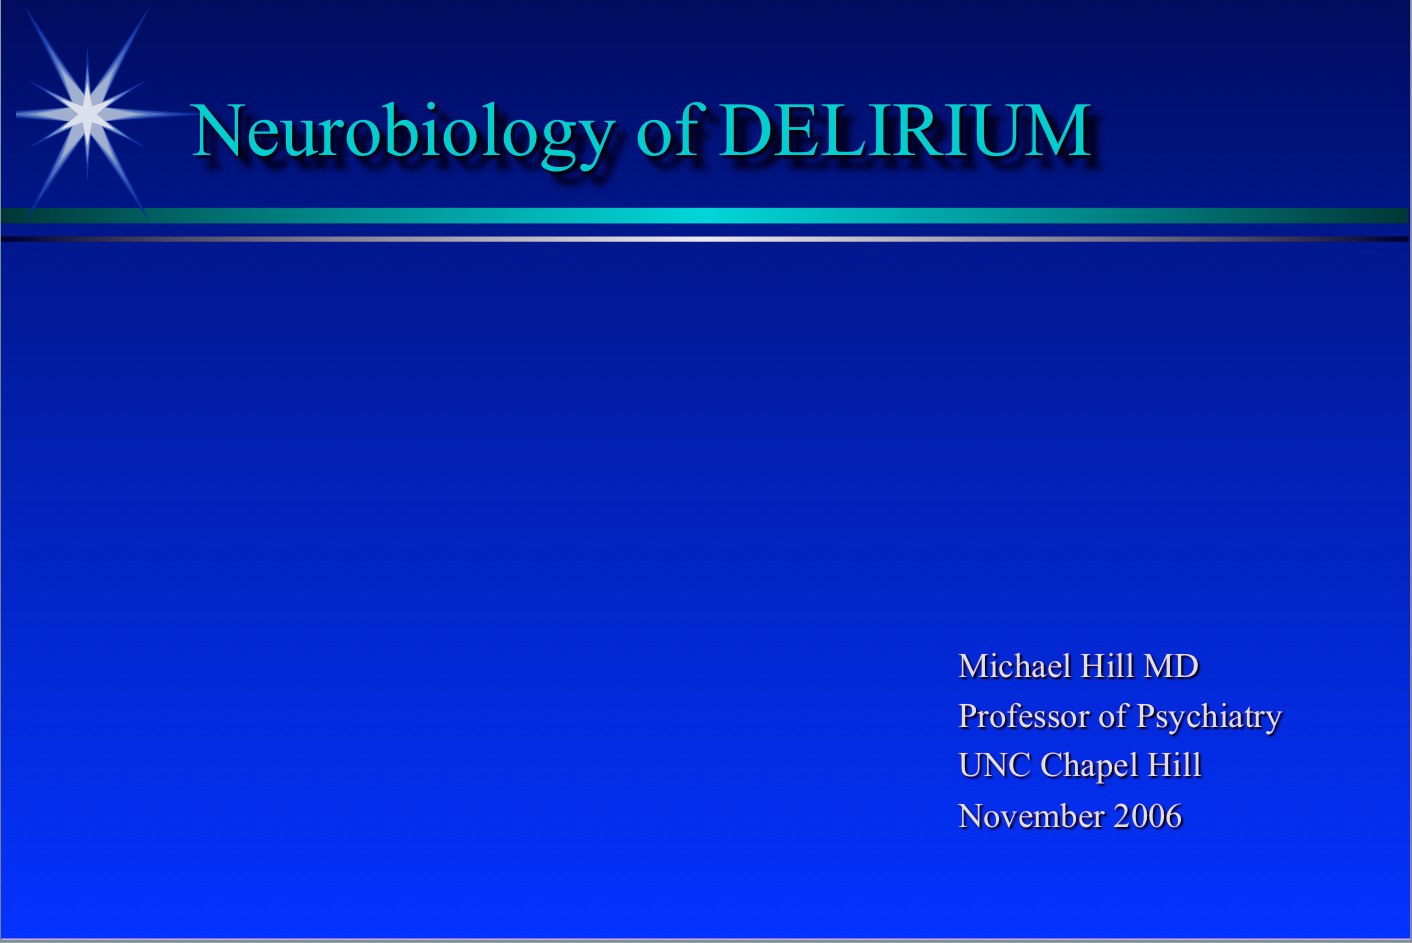 Delirium For Med Students by Michael Hill MD